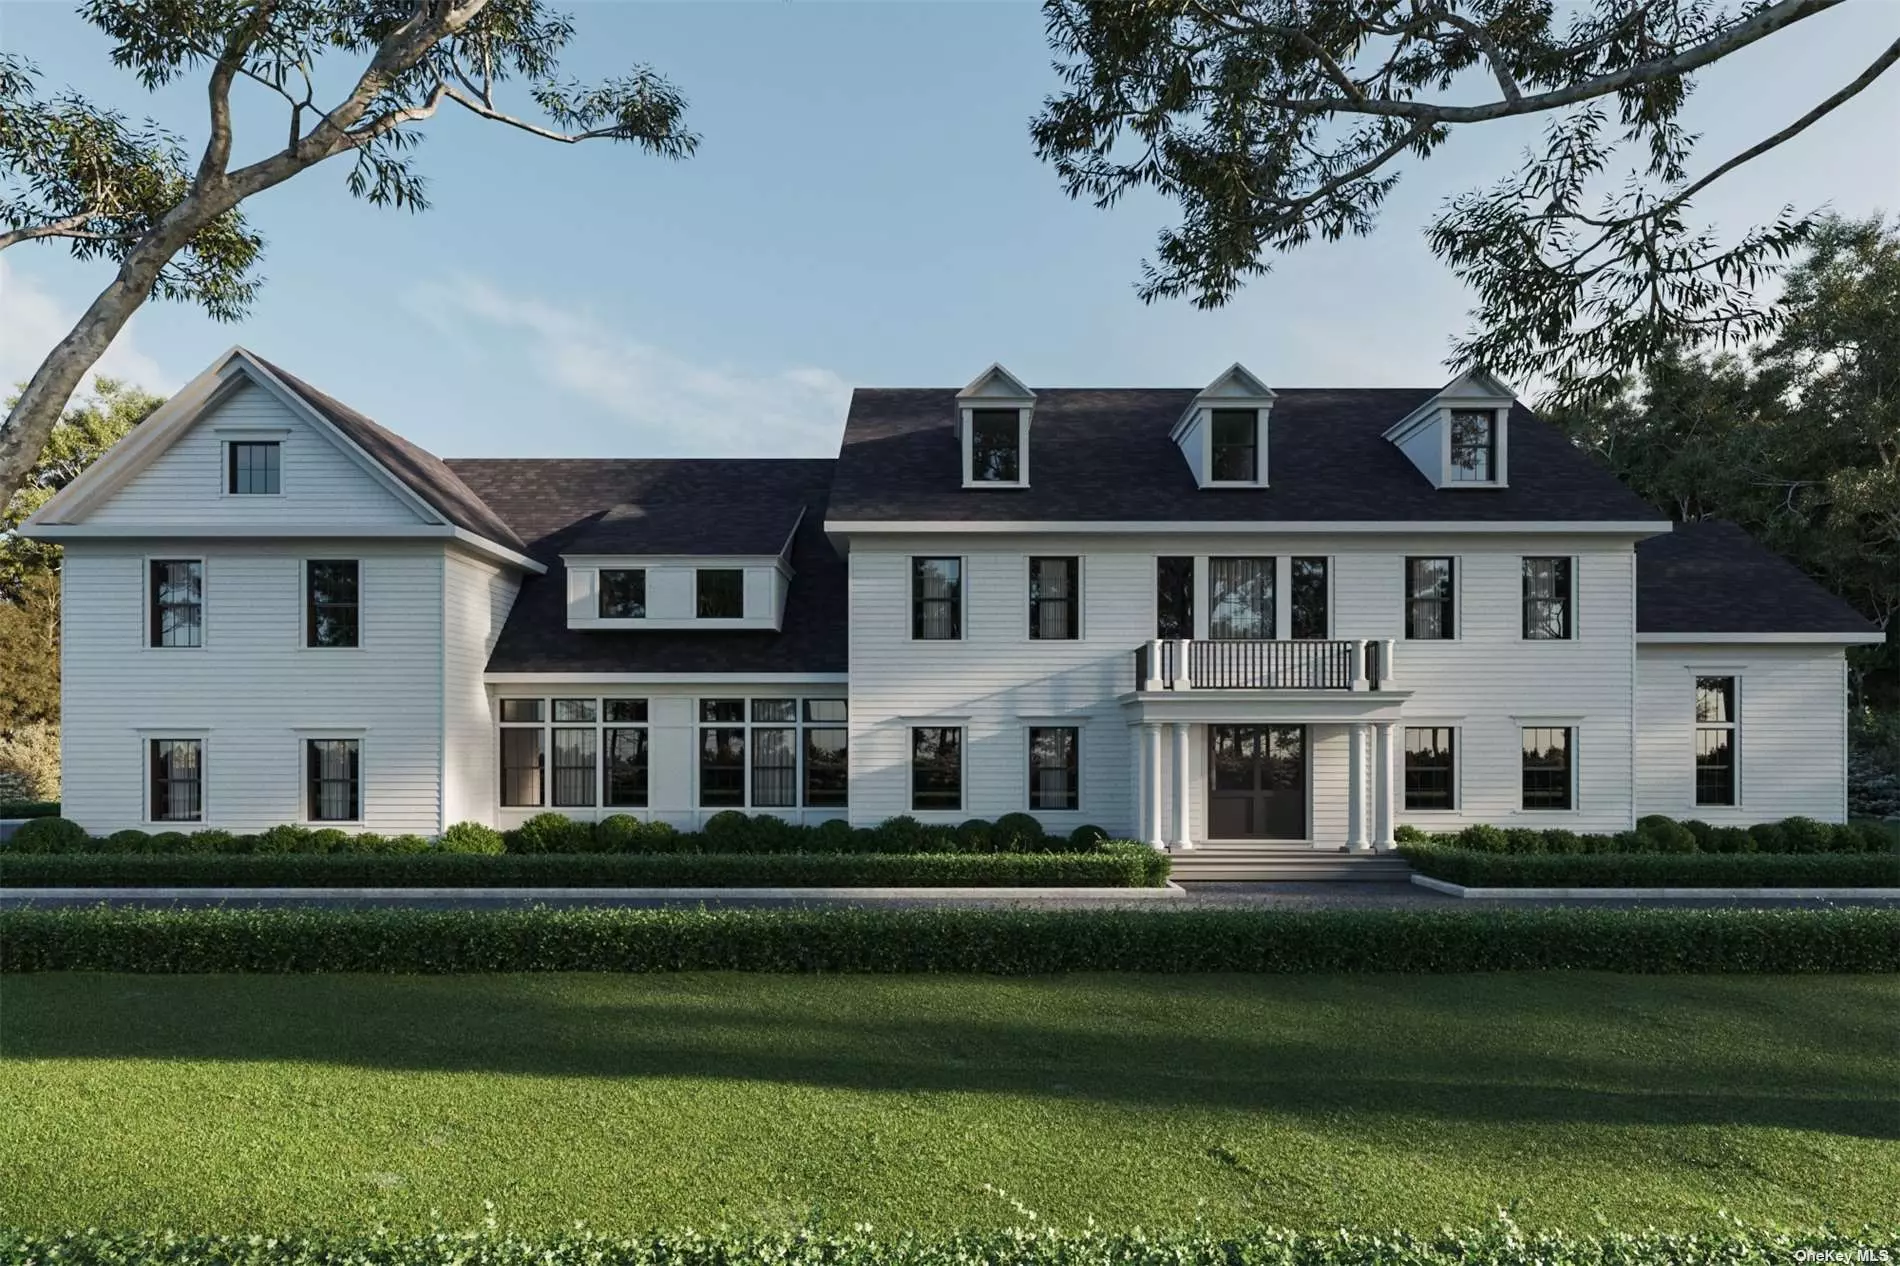 Great News! Construction is underway and this is the perfect time to customize! Introducing this stunning masterpiece of luxury living nestled within the prestigious community of Cold Spring Harbor. A rare opportunity to curate and customize your dream home with a talented hi-end builder whose meticulous approach ensures that every aspect of the home is executed to perfection. This impressive 6000 sq ft home complemented by a 3-car garage epitomizes elegance, sophistication. and modern comfort, combining exquisite architectural design with the finest craftsmanship and attention to detail. As you enter, be captivated by soaring ceilings, a 2-story great room with see-through fireplace to adjacent living room boasting double height floor to ceiling windows. The gourmet kitchen surpasses all expectations with custom cabinetry, a center island, top-of-the-line appliances and pantry. An additional primary ensuite, study, two powder rooms and a mudroom completes the first floor. Upstairs offers all ensuite bedrooms plus a separate wing featuring a sumptuous primary bedroom with a spa-like bathroom and generous size closets. Potential space for an elevator from 2nd fl down to basement. Situated on a private lush 2 acre property offers endless possibilities for outdoor enjoyment. Summer 2024 completion. Renderings are for reference only!